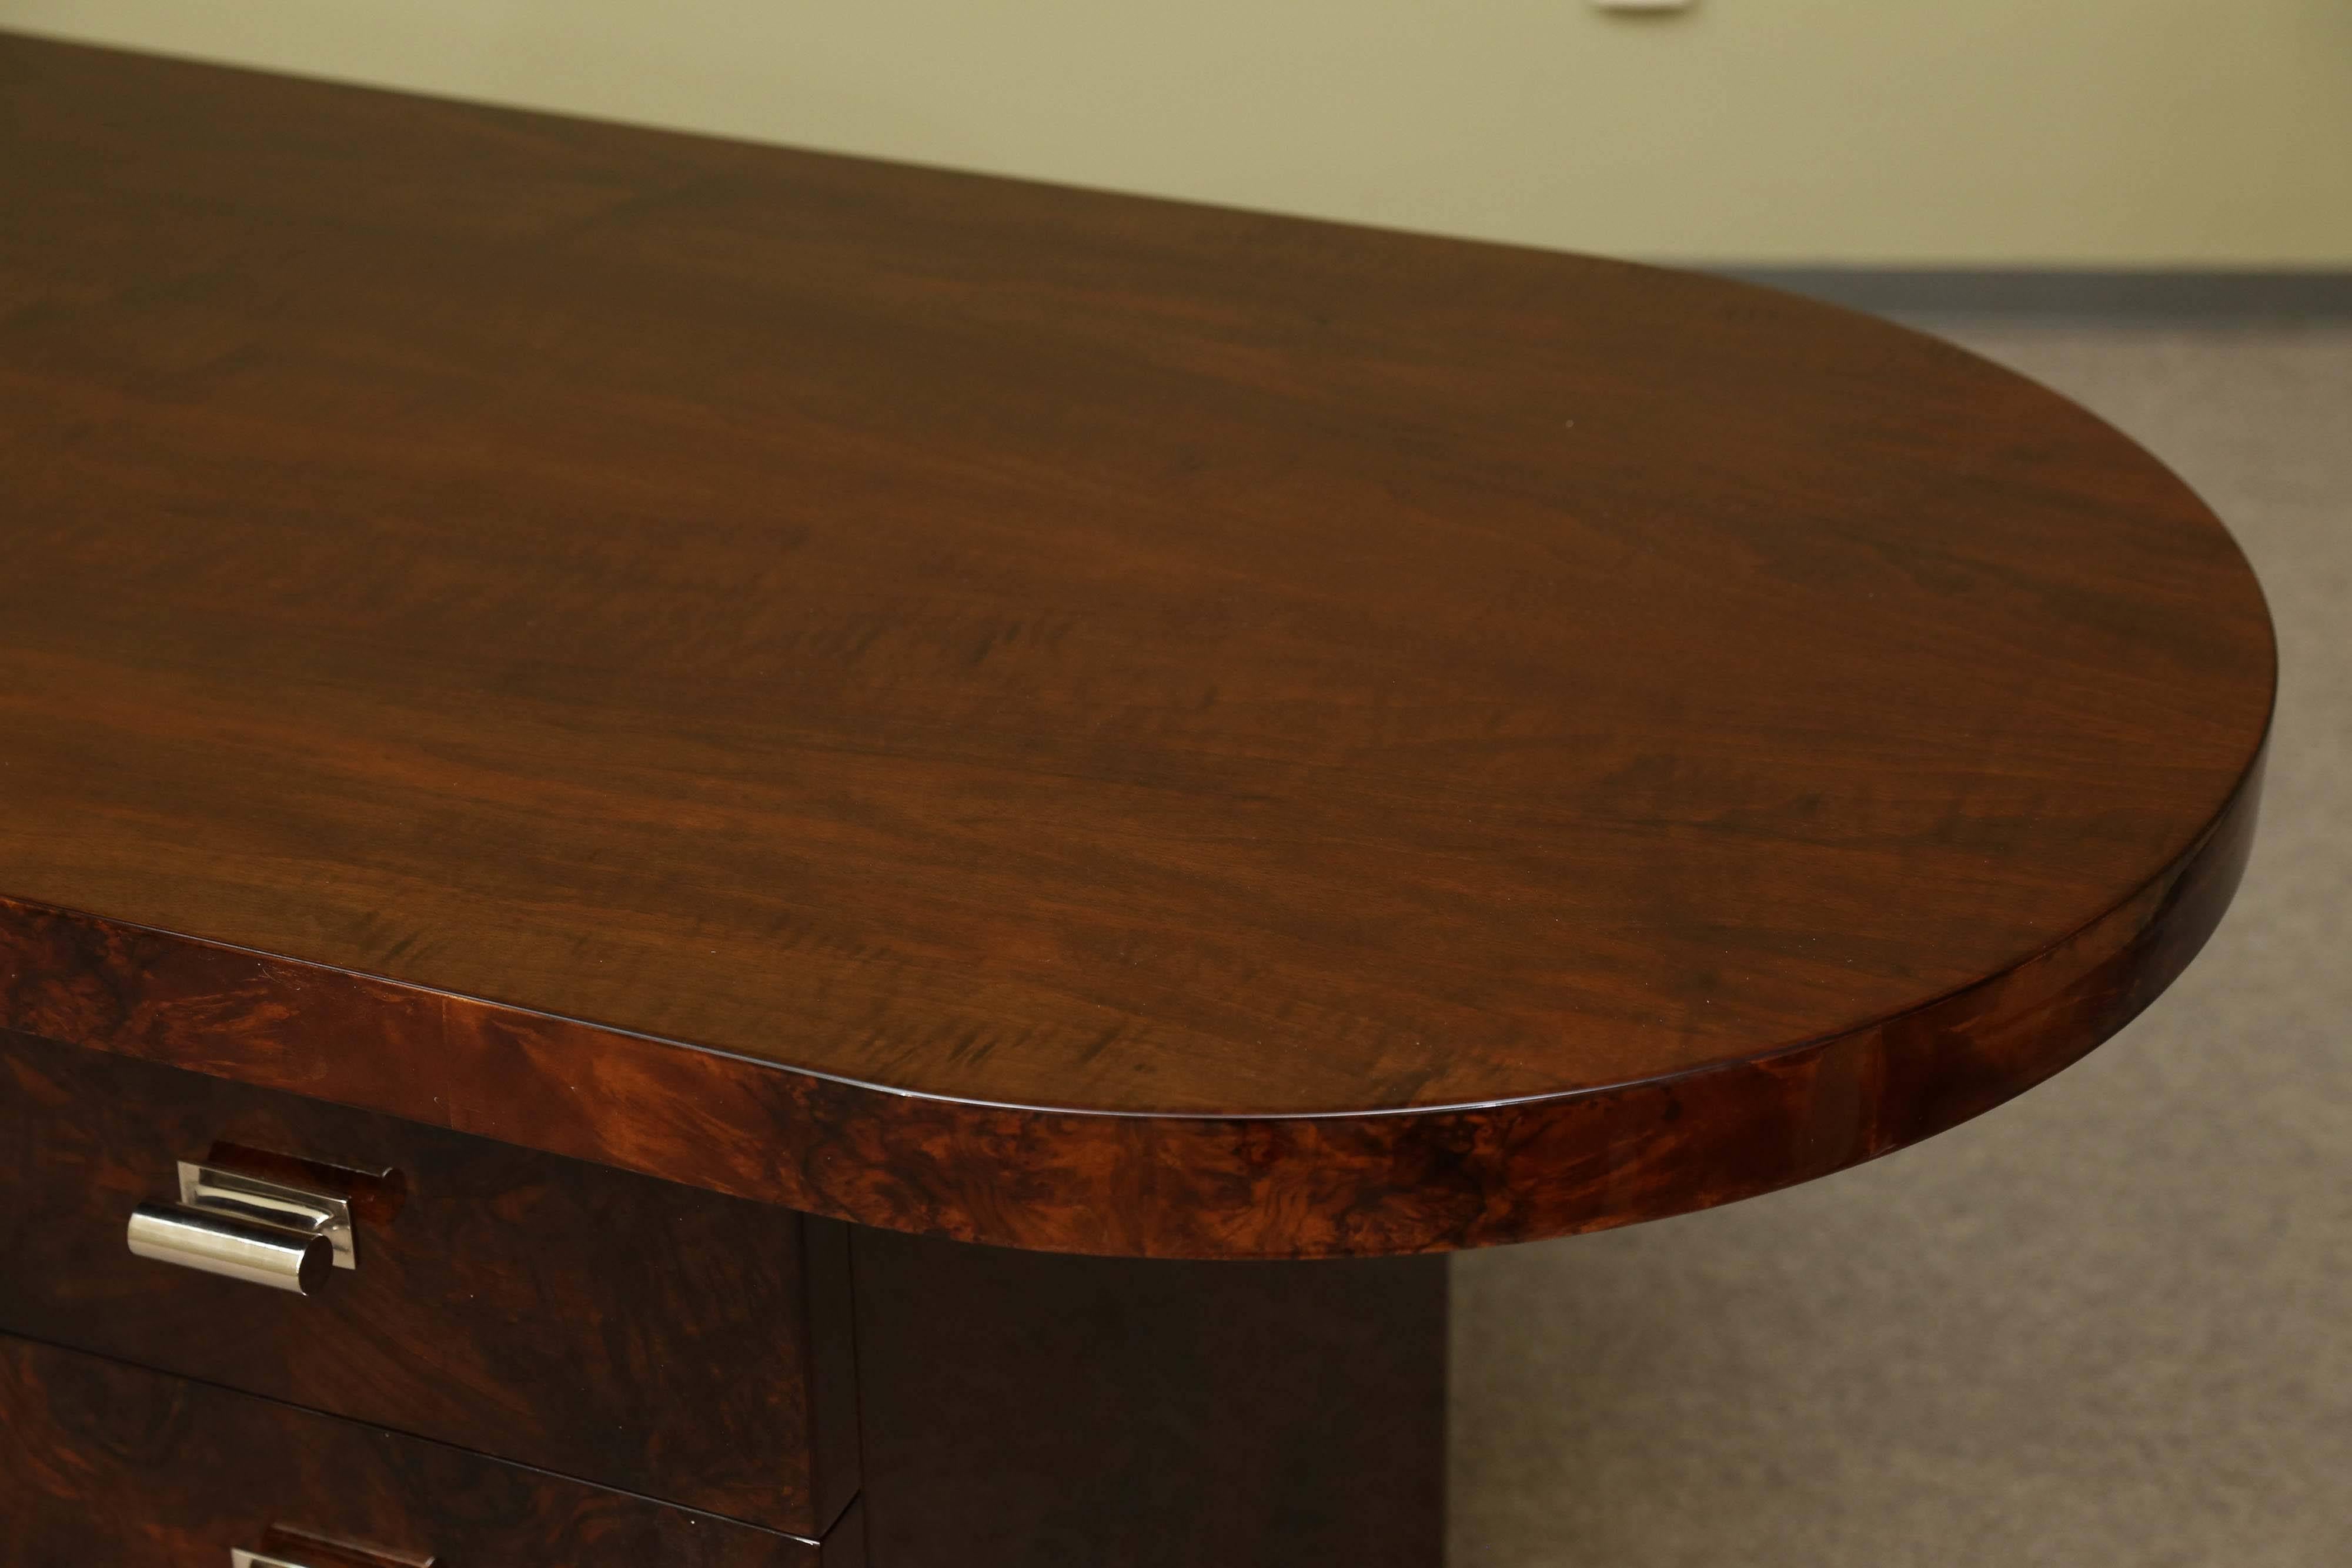 The desk is made out of fine walnut wood. It has a wide tabletop that displays the beauty of the wood. On the left side the tabletop has a round end on the right it is angular. The tabletop is supported by the four drawers on the left side and